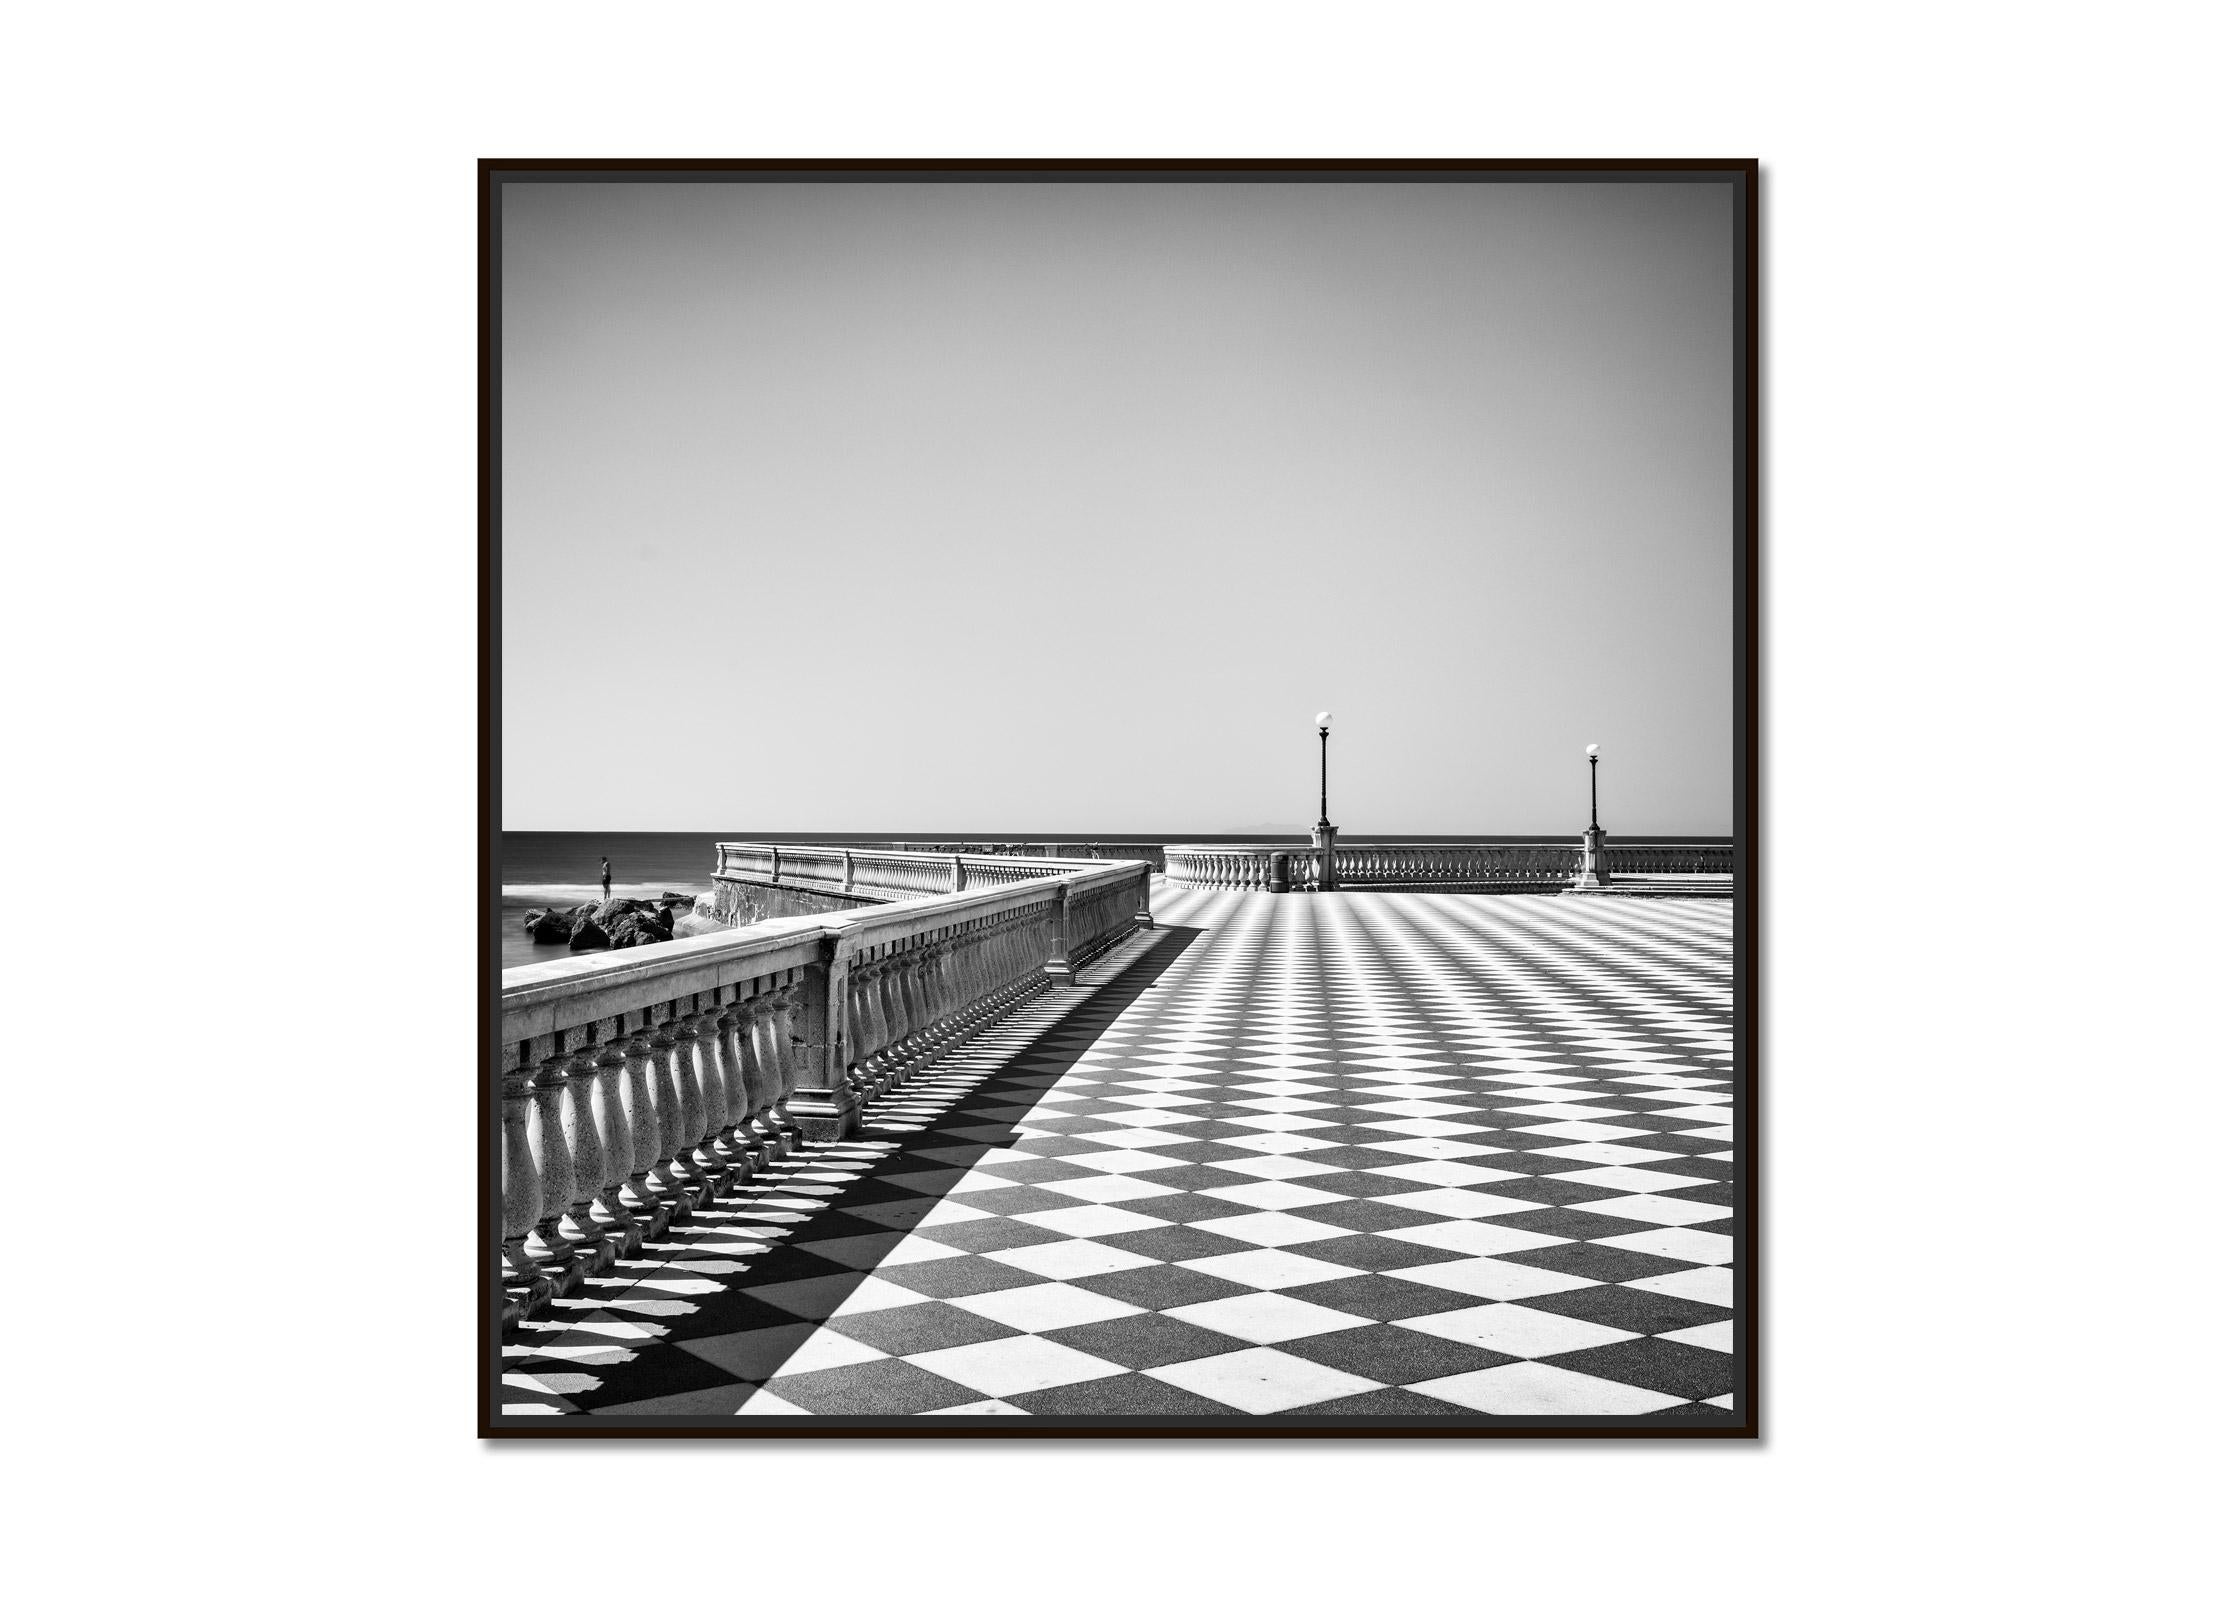 Terrazza Mascagni, Architecture, Tuscany, black and white photography, landscape - Photograph by Gerald Berghammer